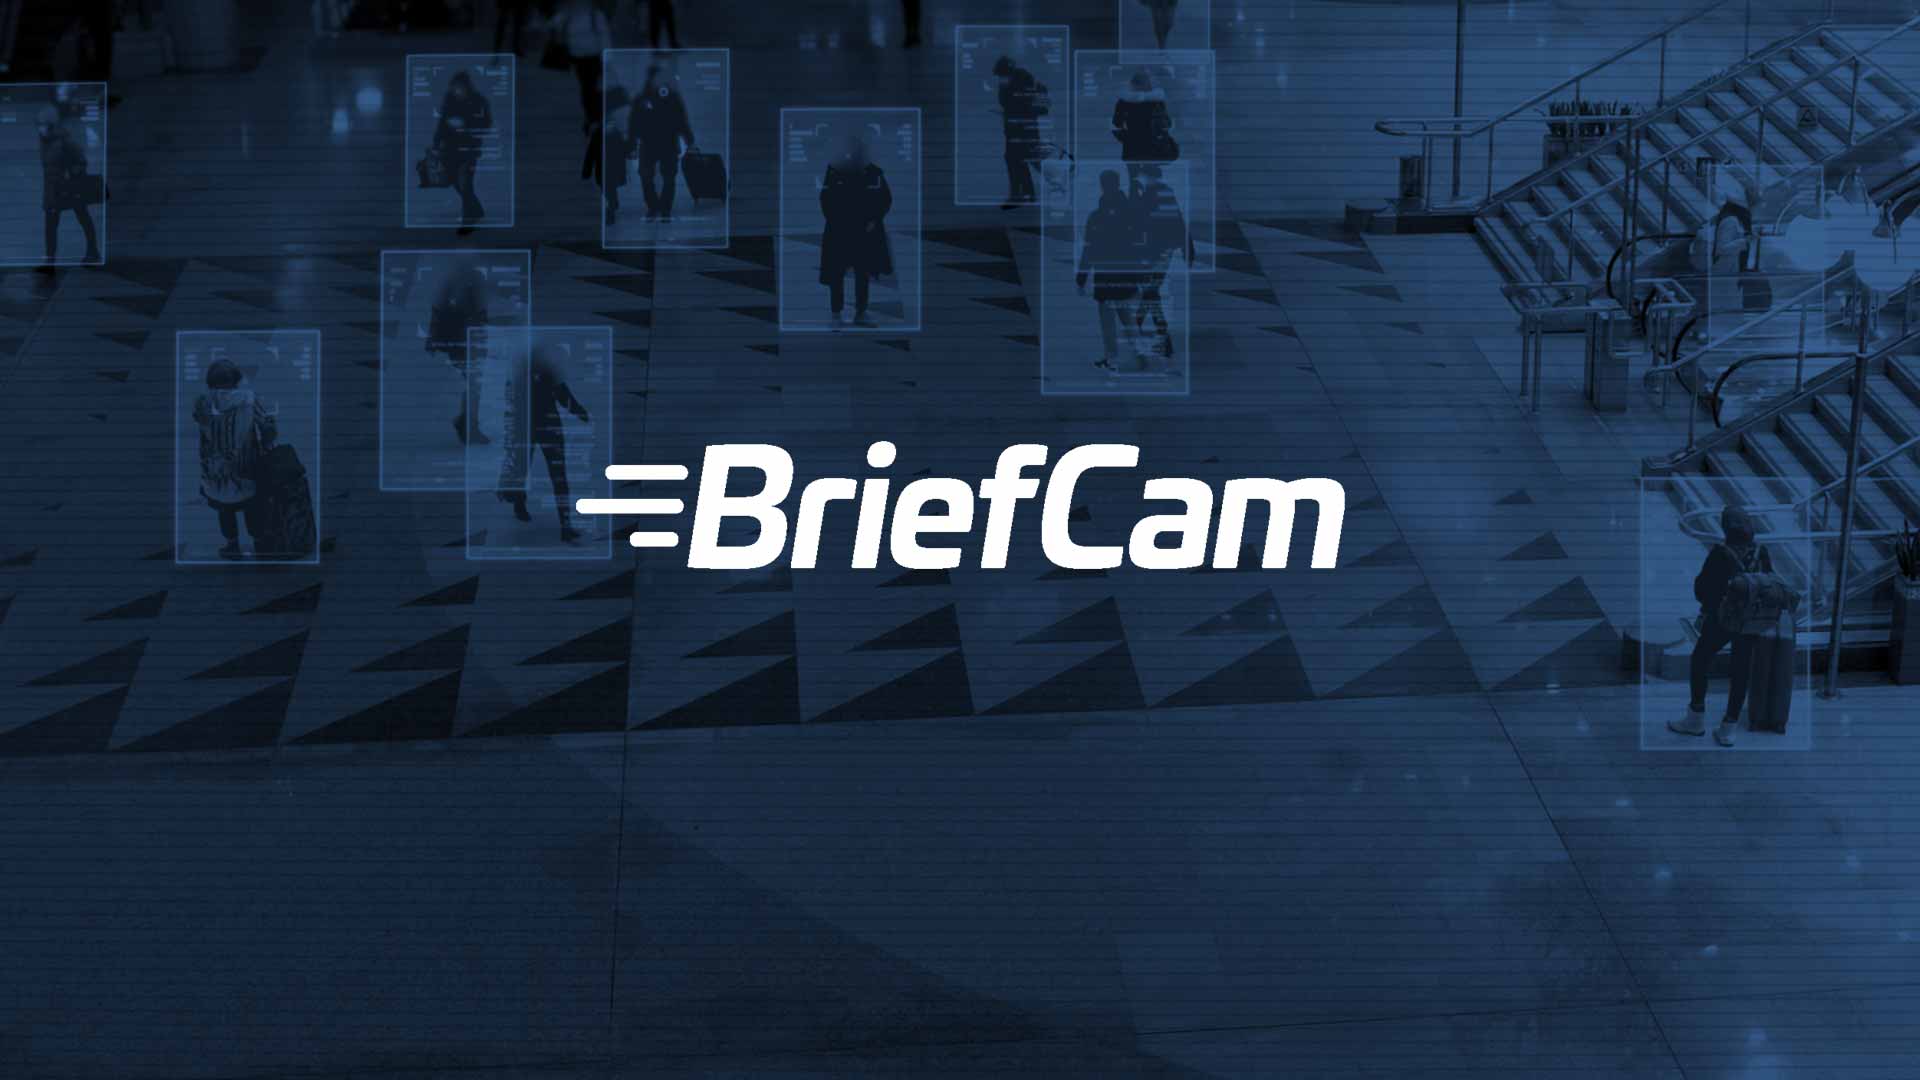 BriefCam_3-Must-haves-in-Finding-the-Right-Video-Analytics-Solution